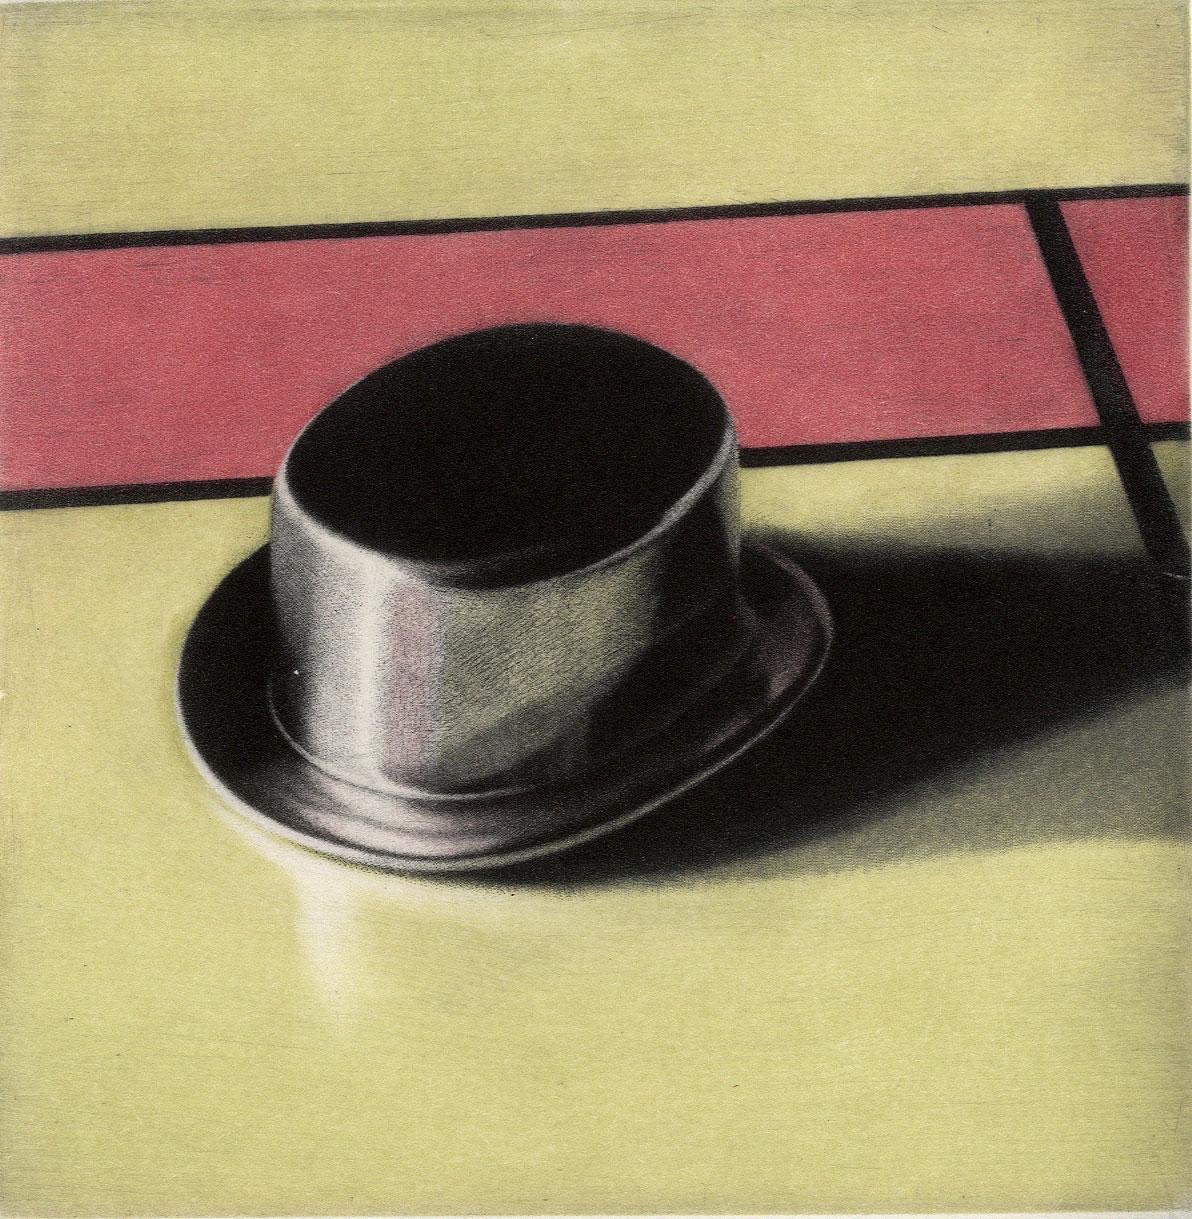 Peter Jogo Still-Life Print - Monopoly Set II (Was the Top Hat your favorite piece?)